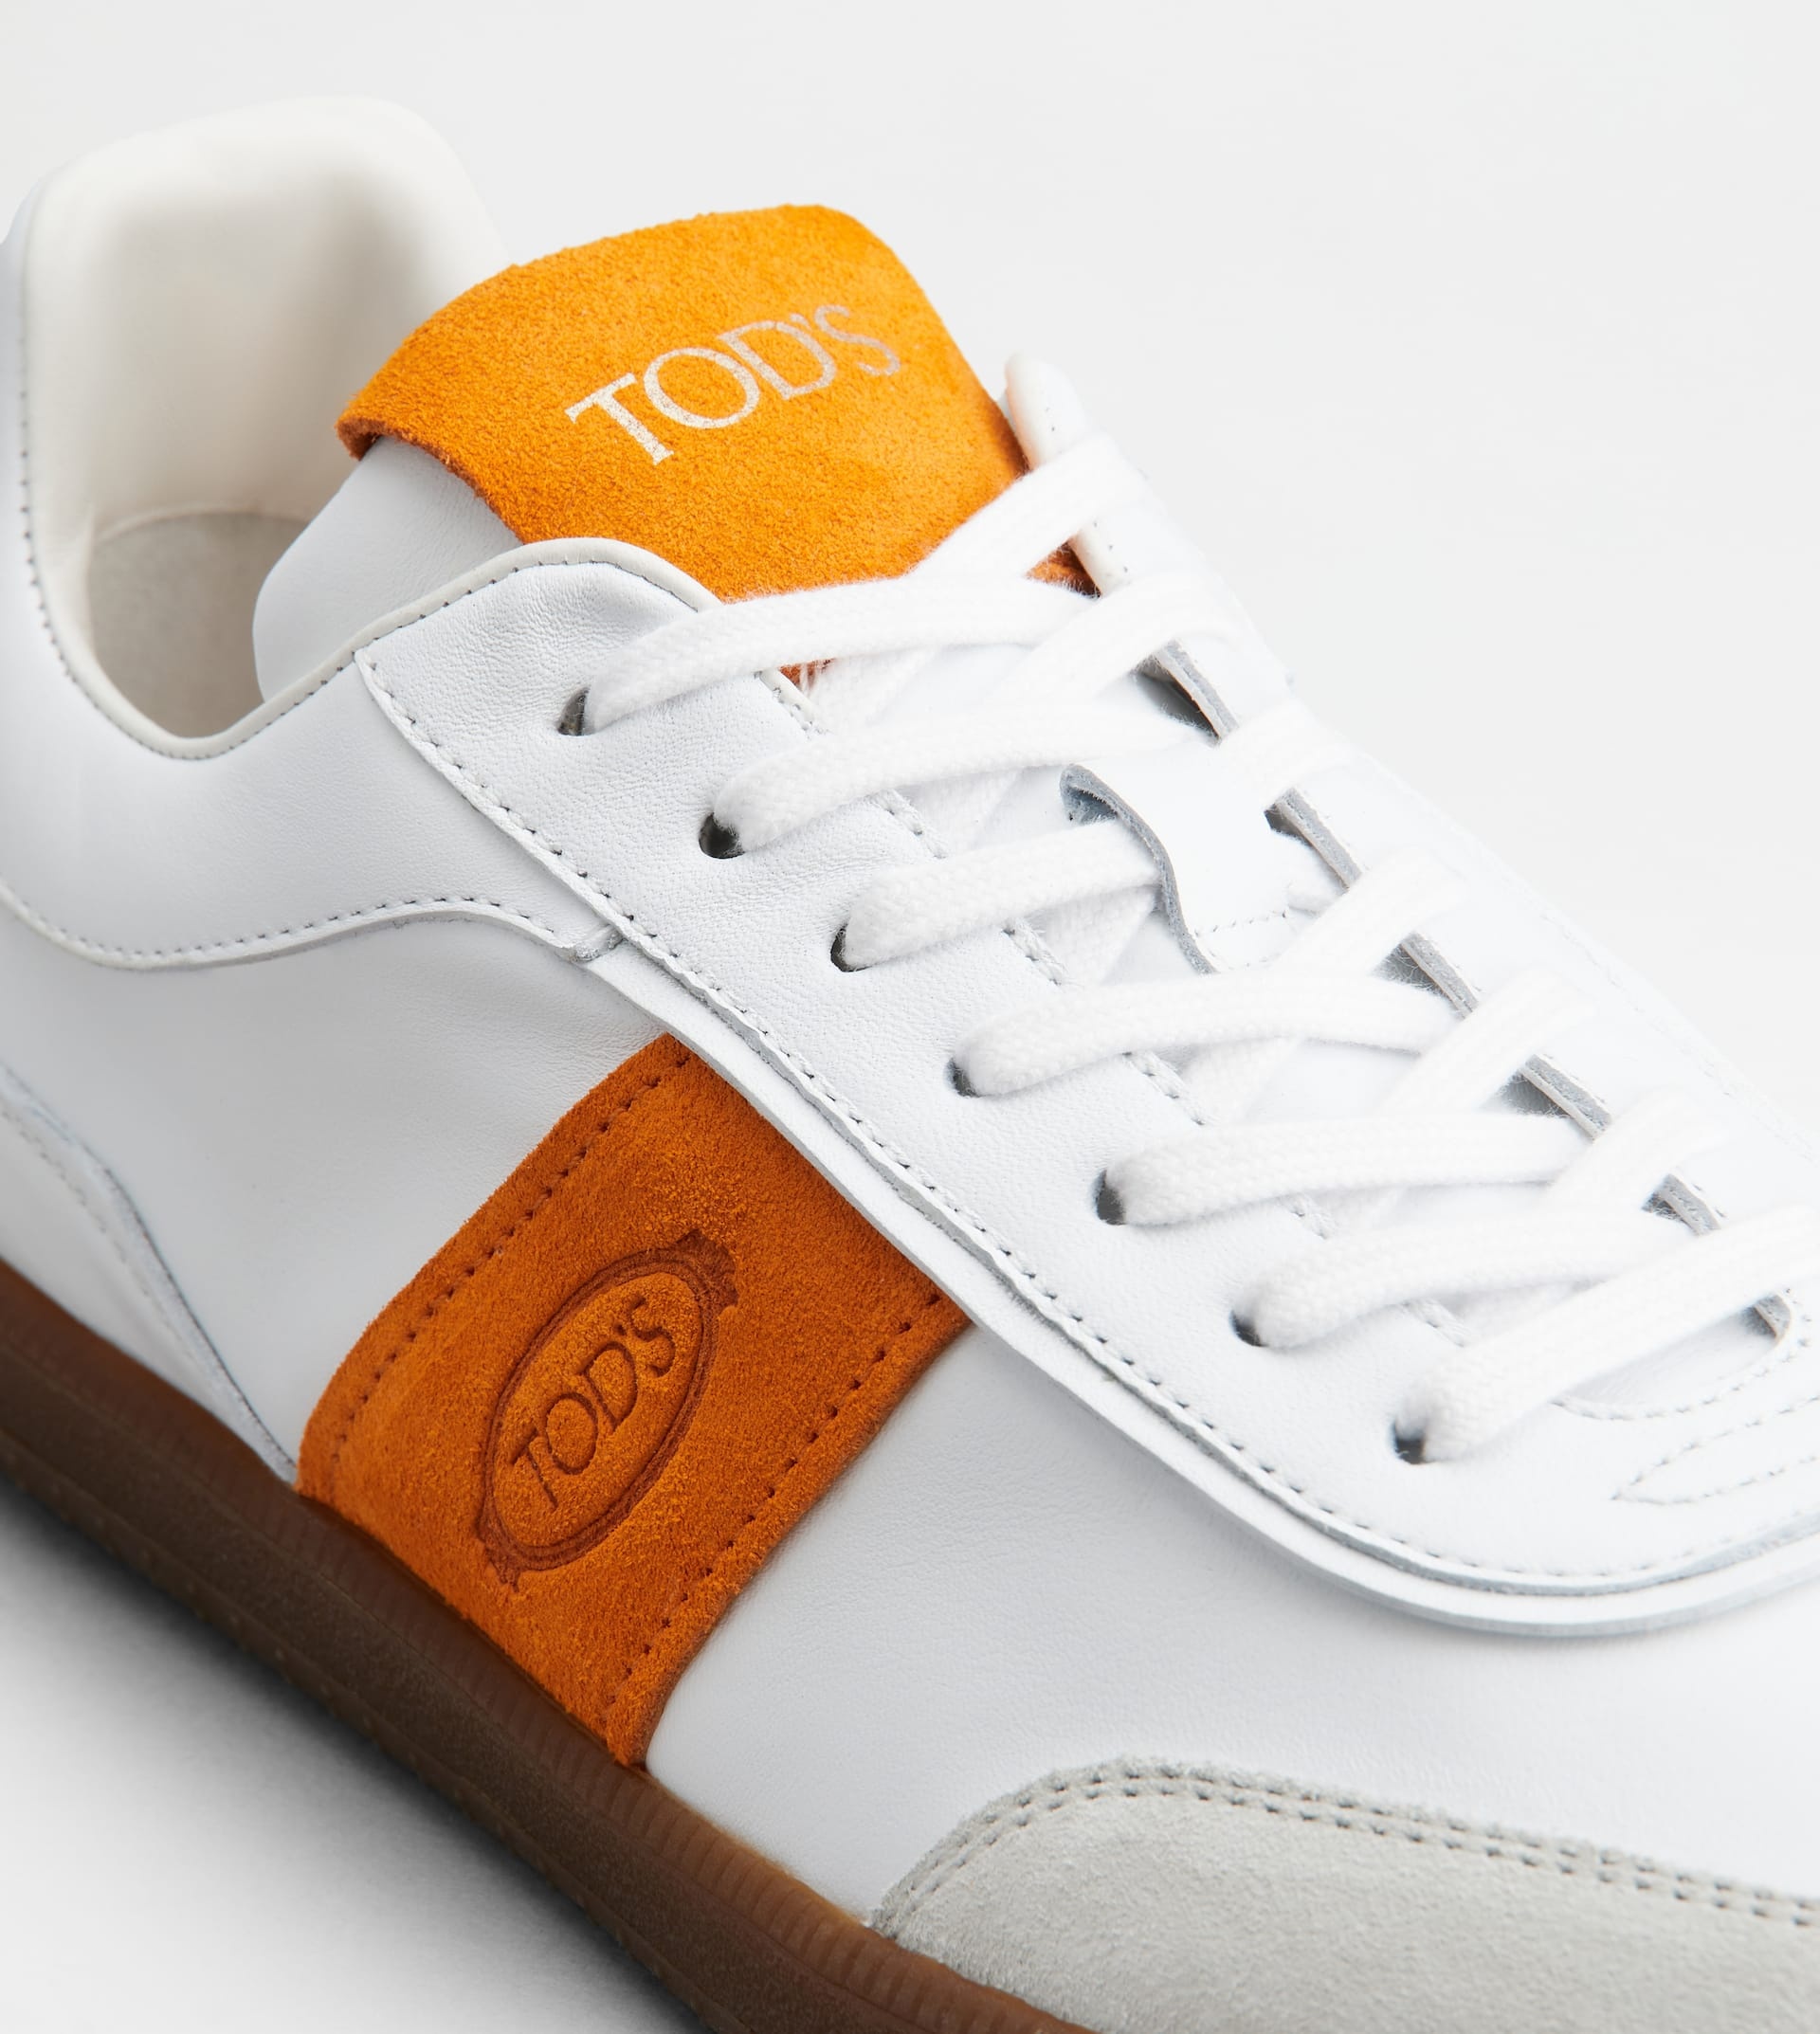 TOD'S TABS SNEAKERS IN SUEDE - WHITE, ORANGE - 6